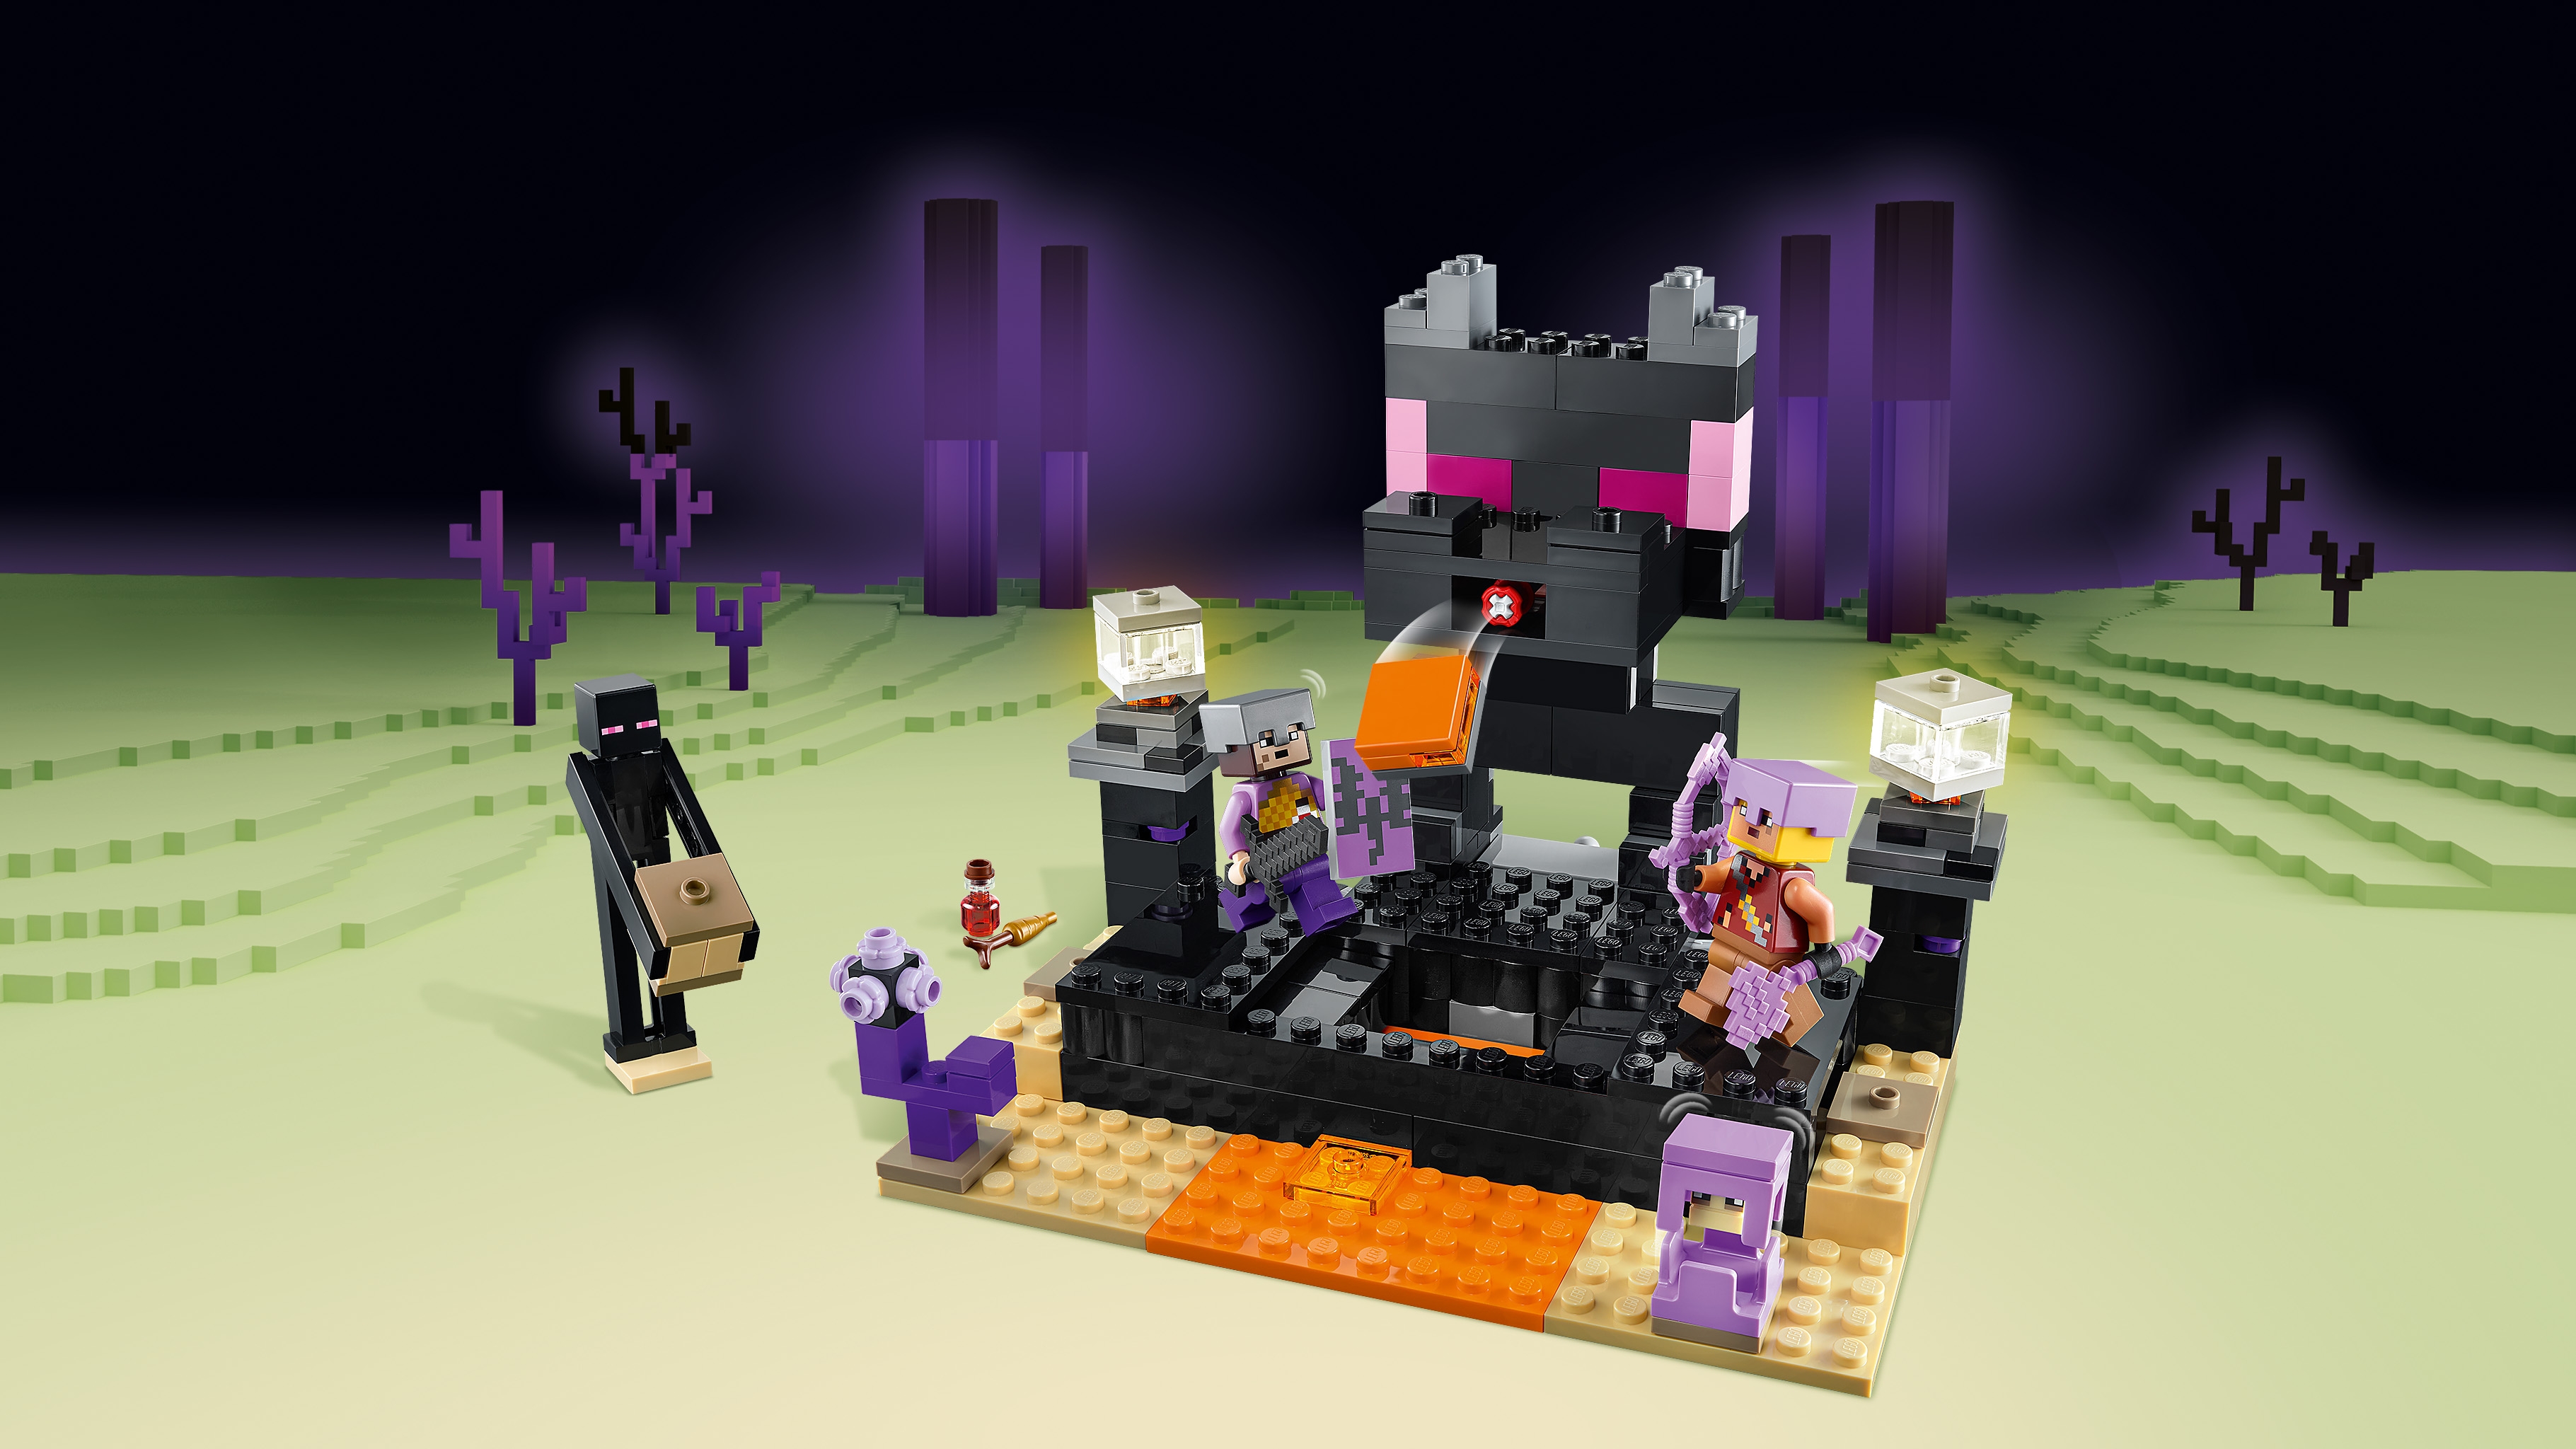 Made a custom skin for the ender dragon that makes it look like